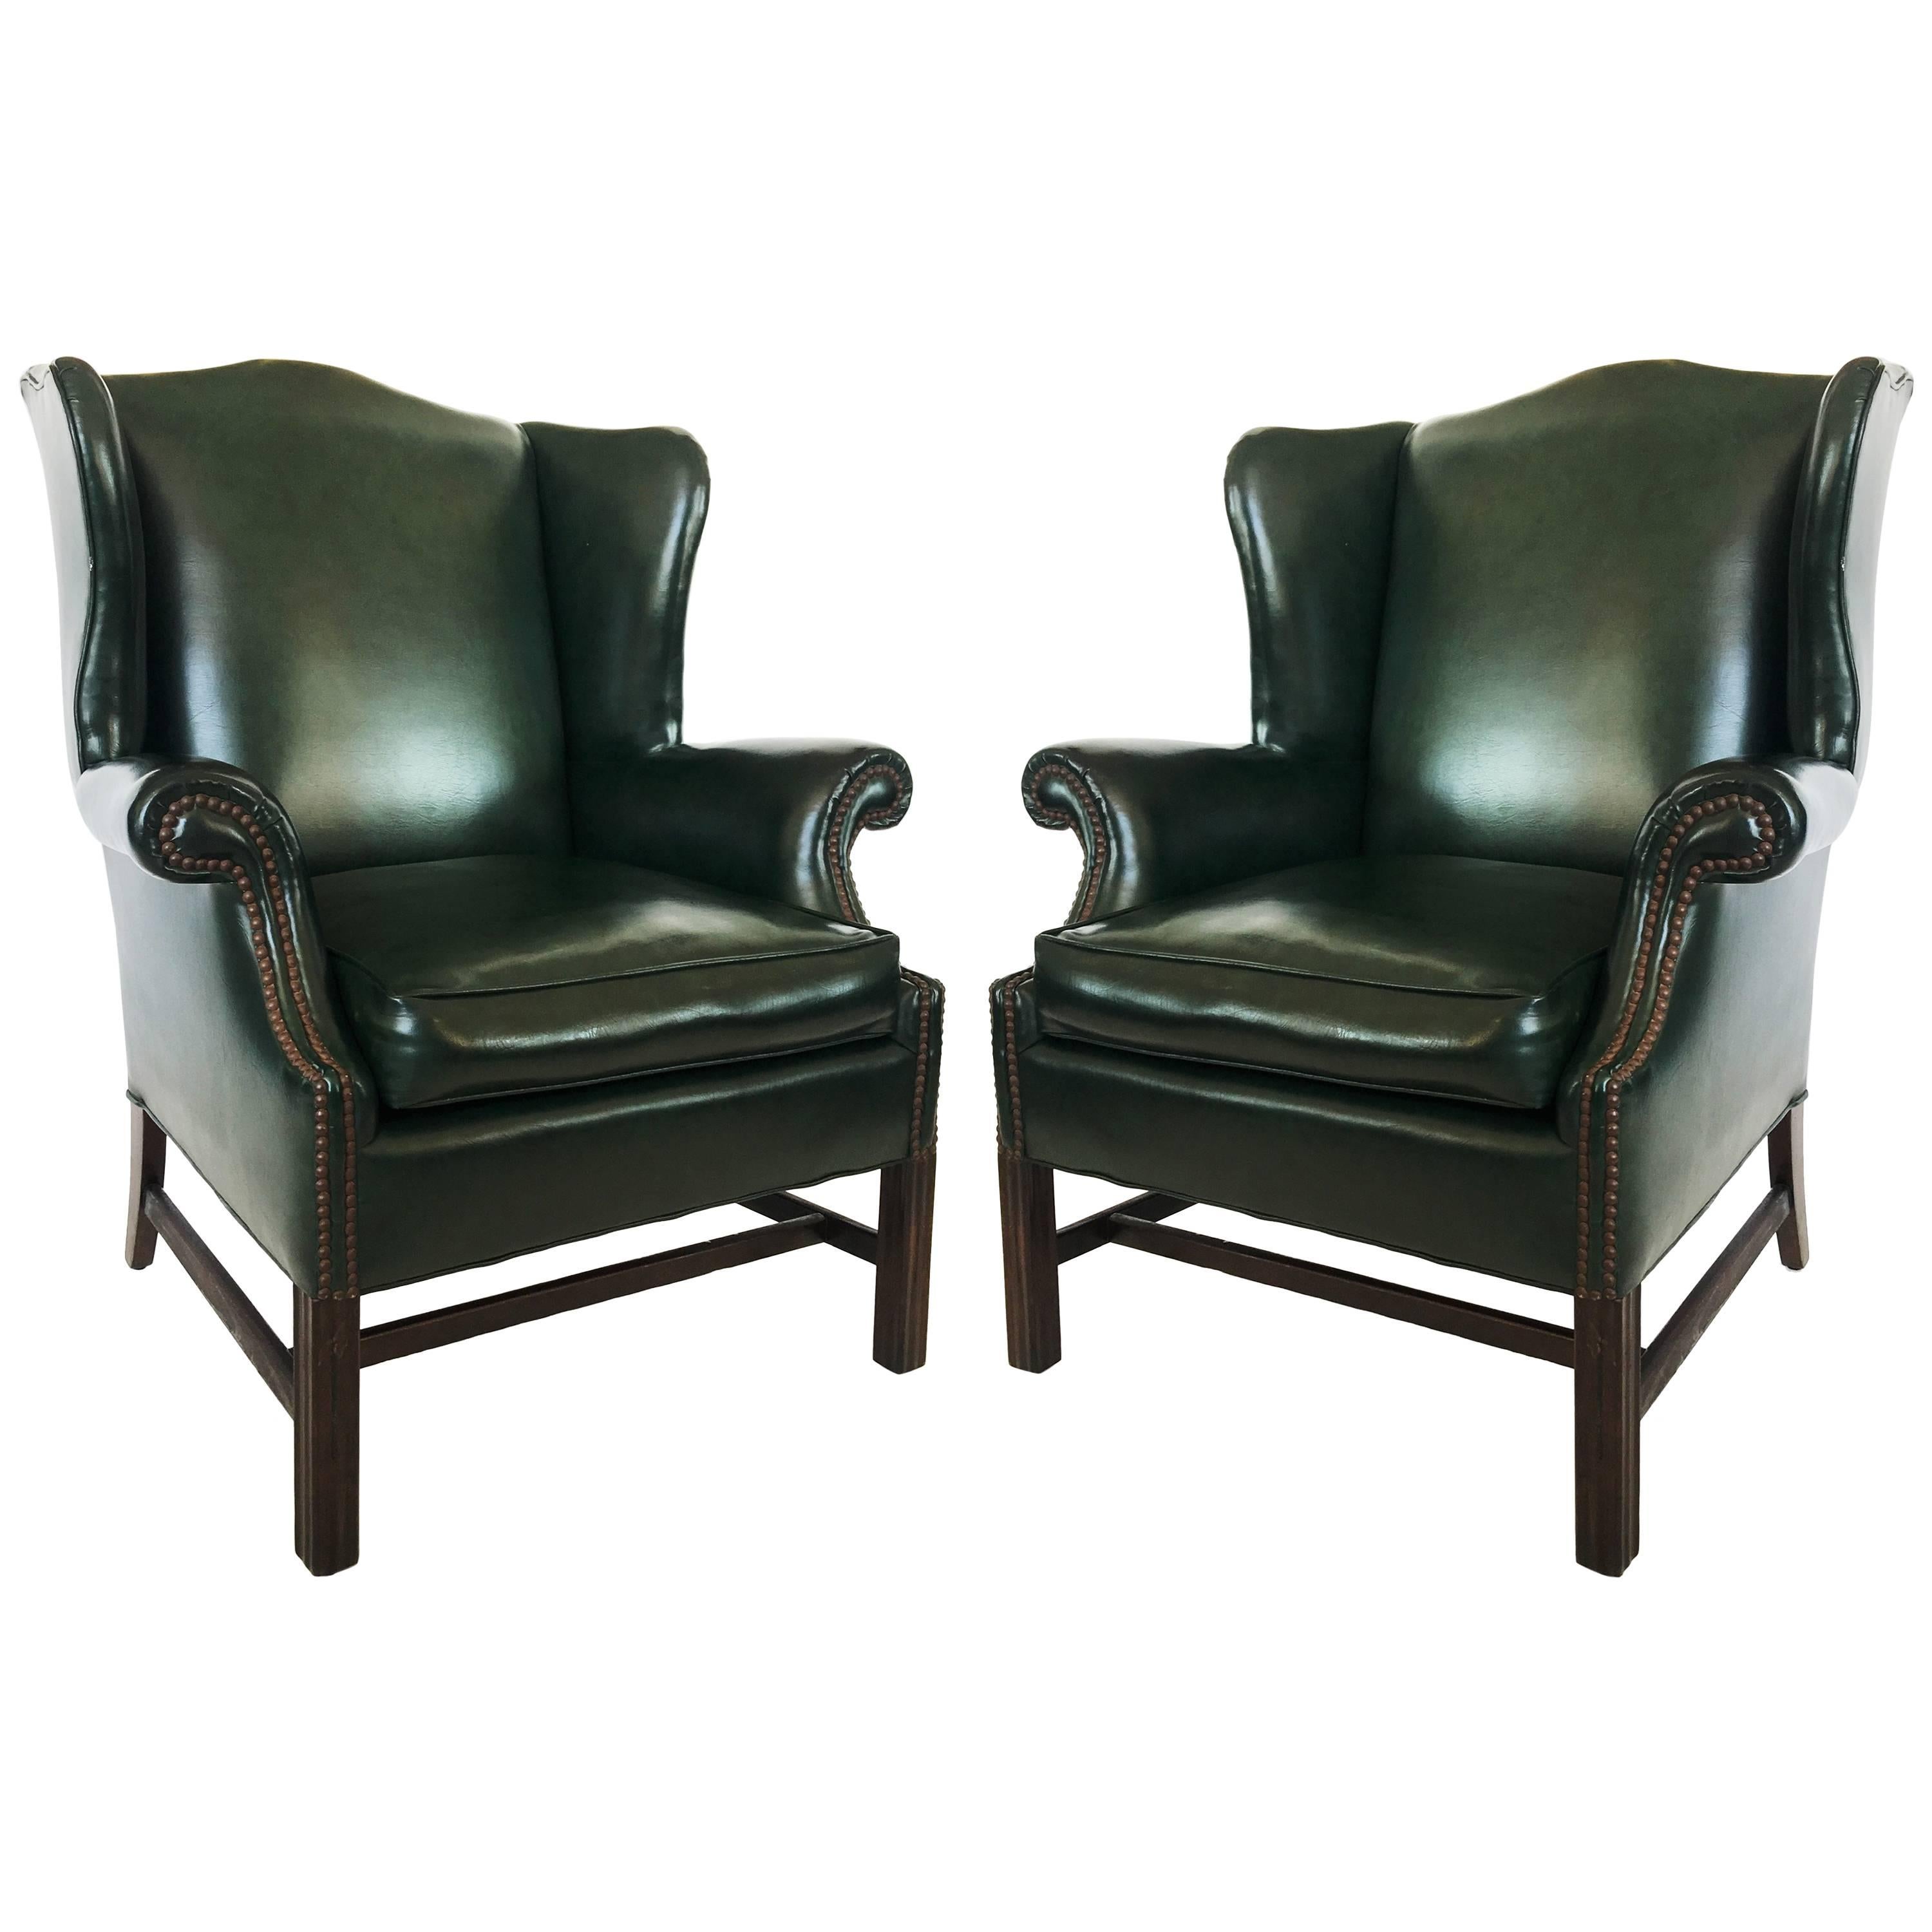 Pair of Chesterfield Tufted Dark Green Leather Wingback Chairs For Sale